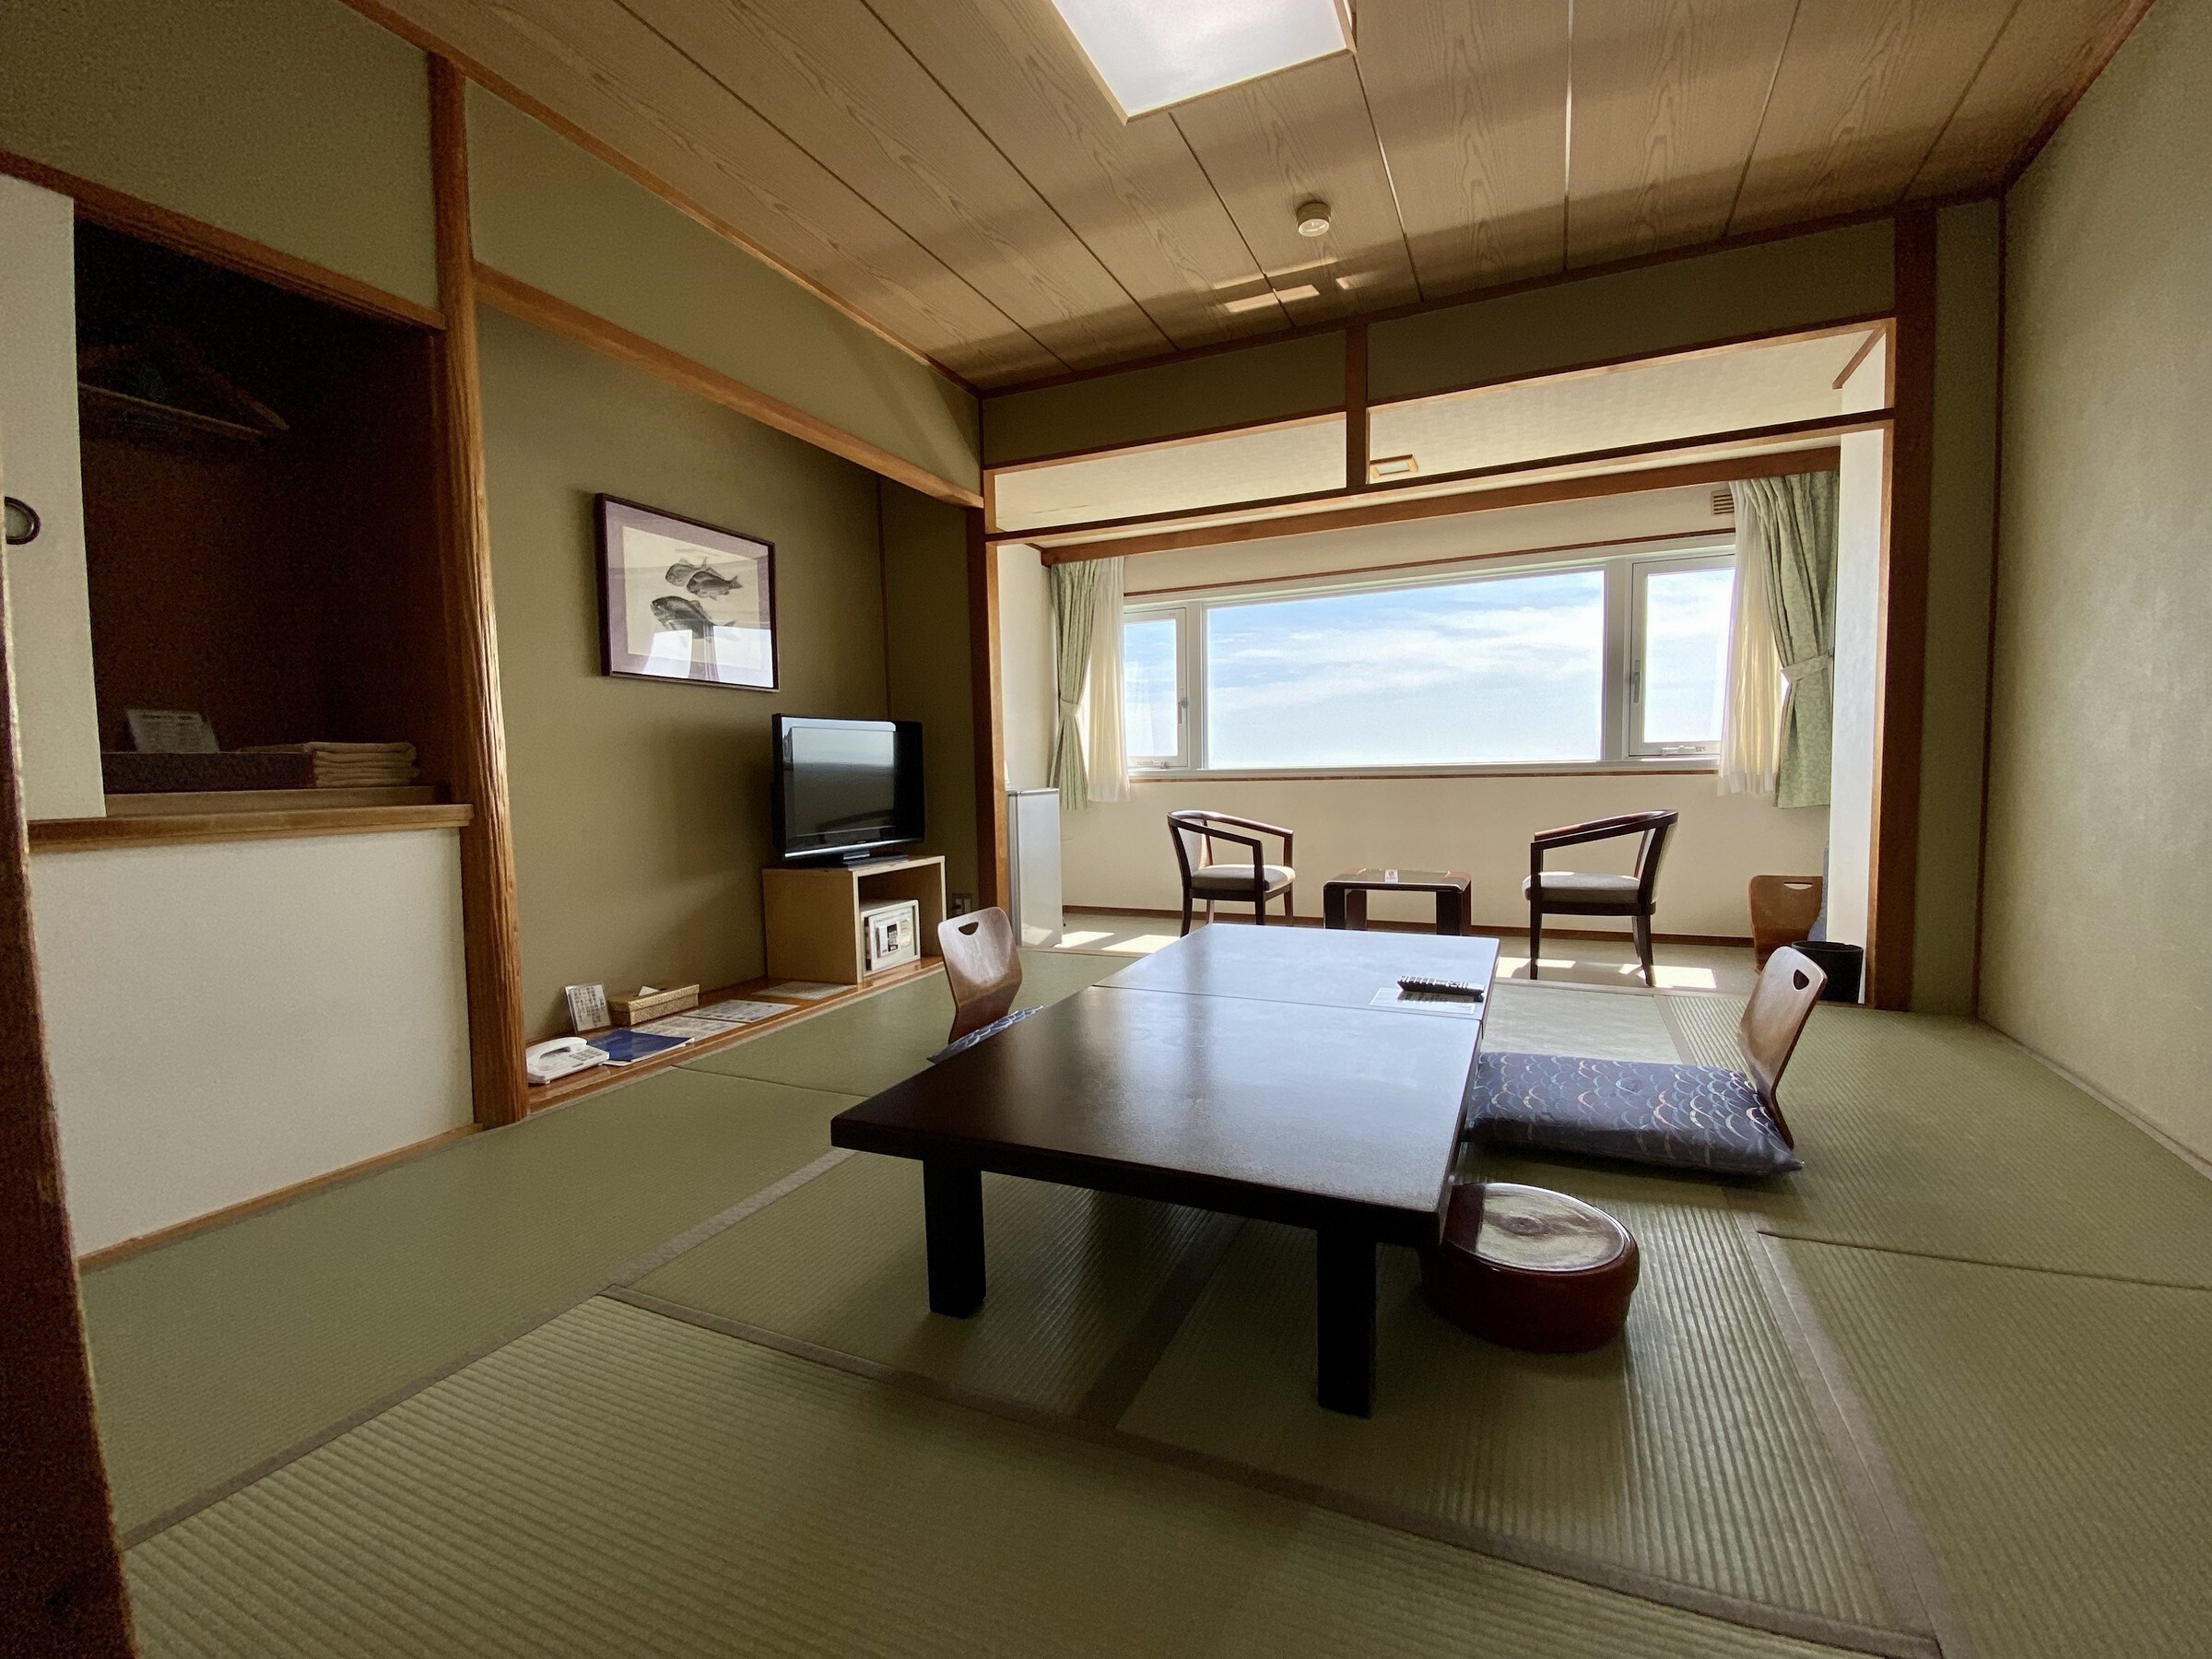 One example of a guest room (non-smoking, facing the sea, 8 tatami mats)